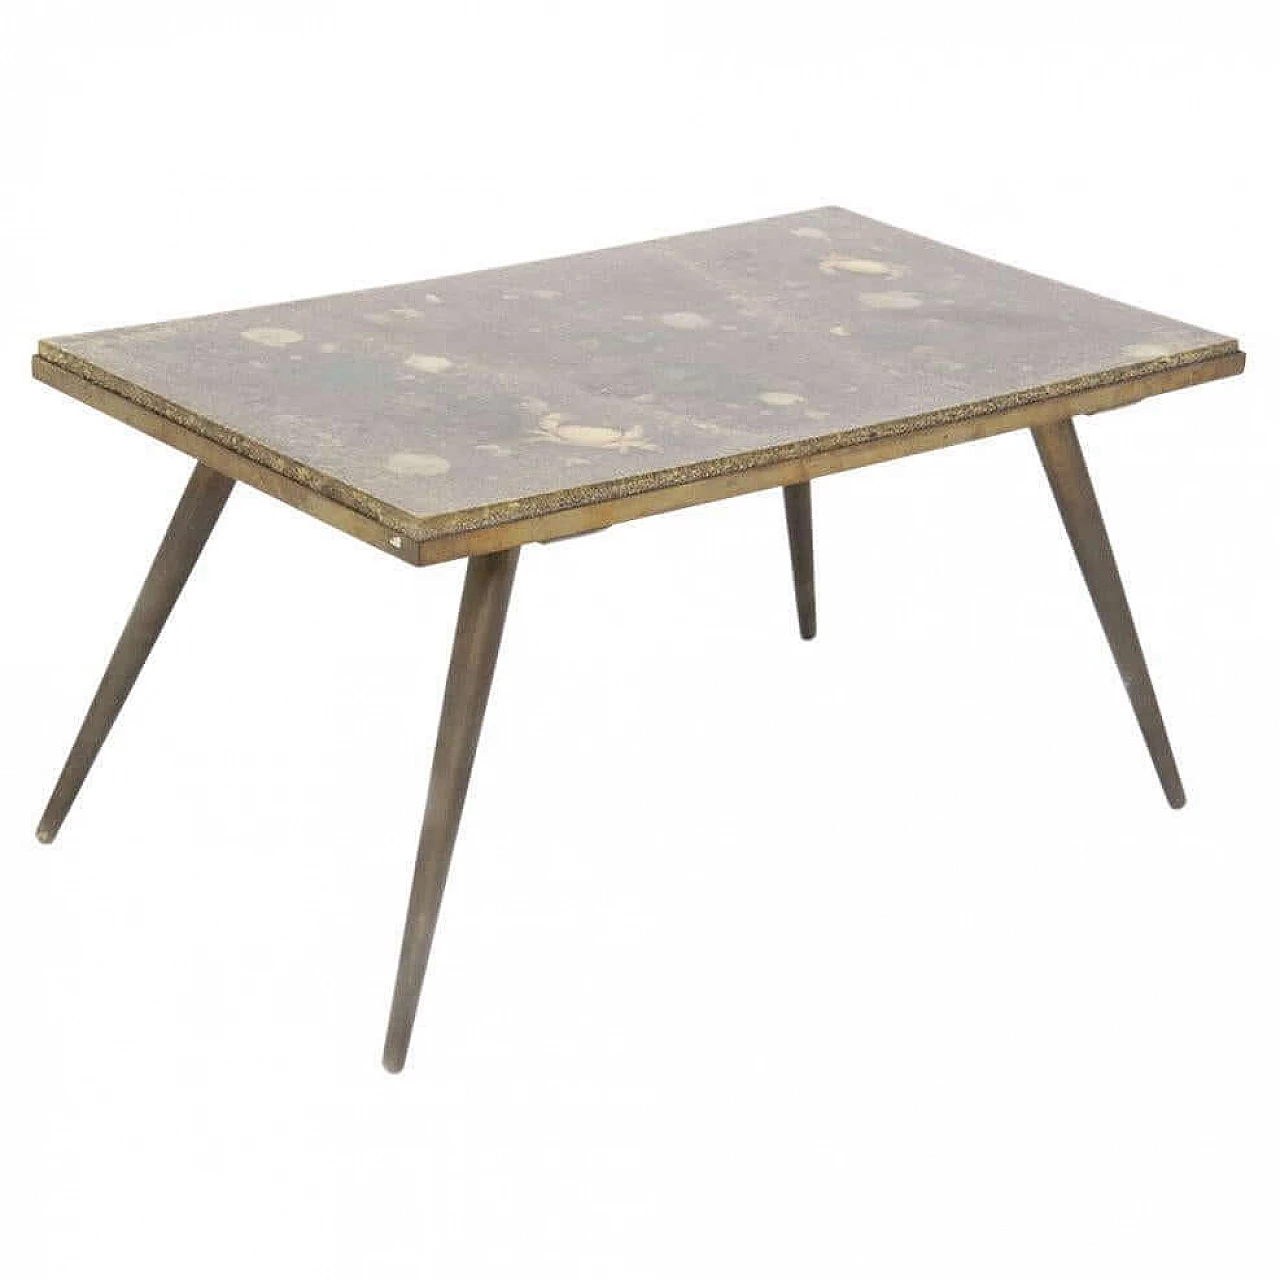 Brass and resin coffee table with marine fossils, 1950s 1444757